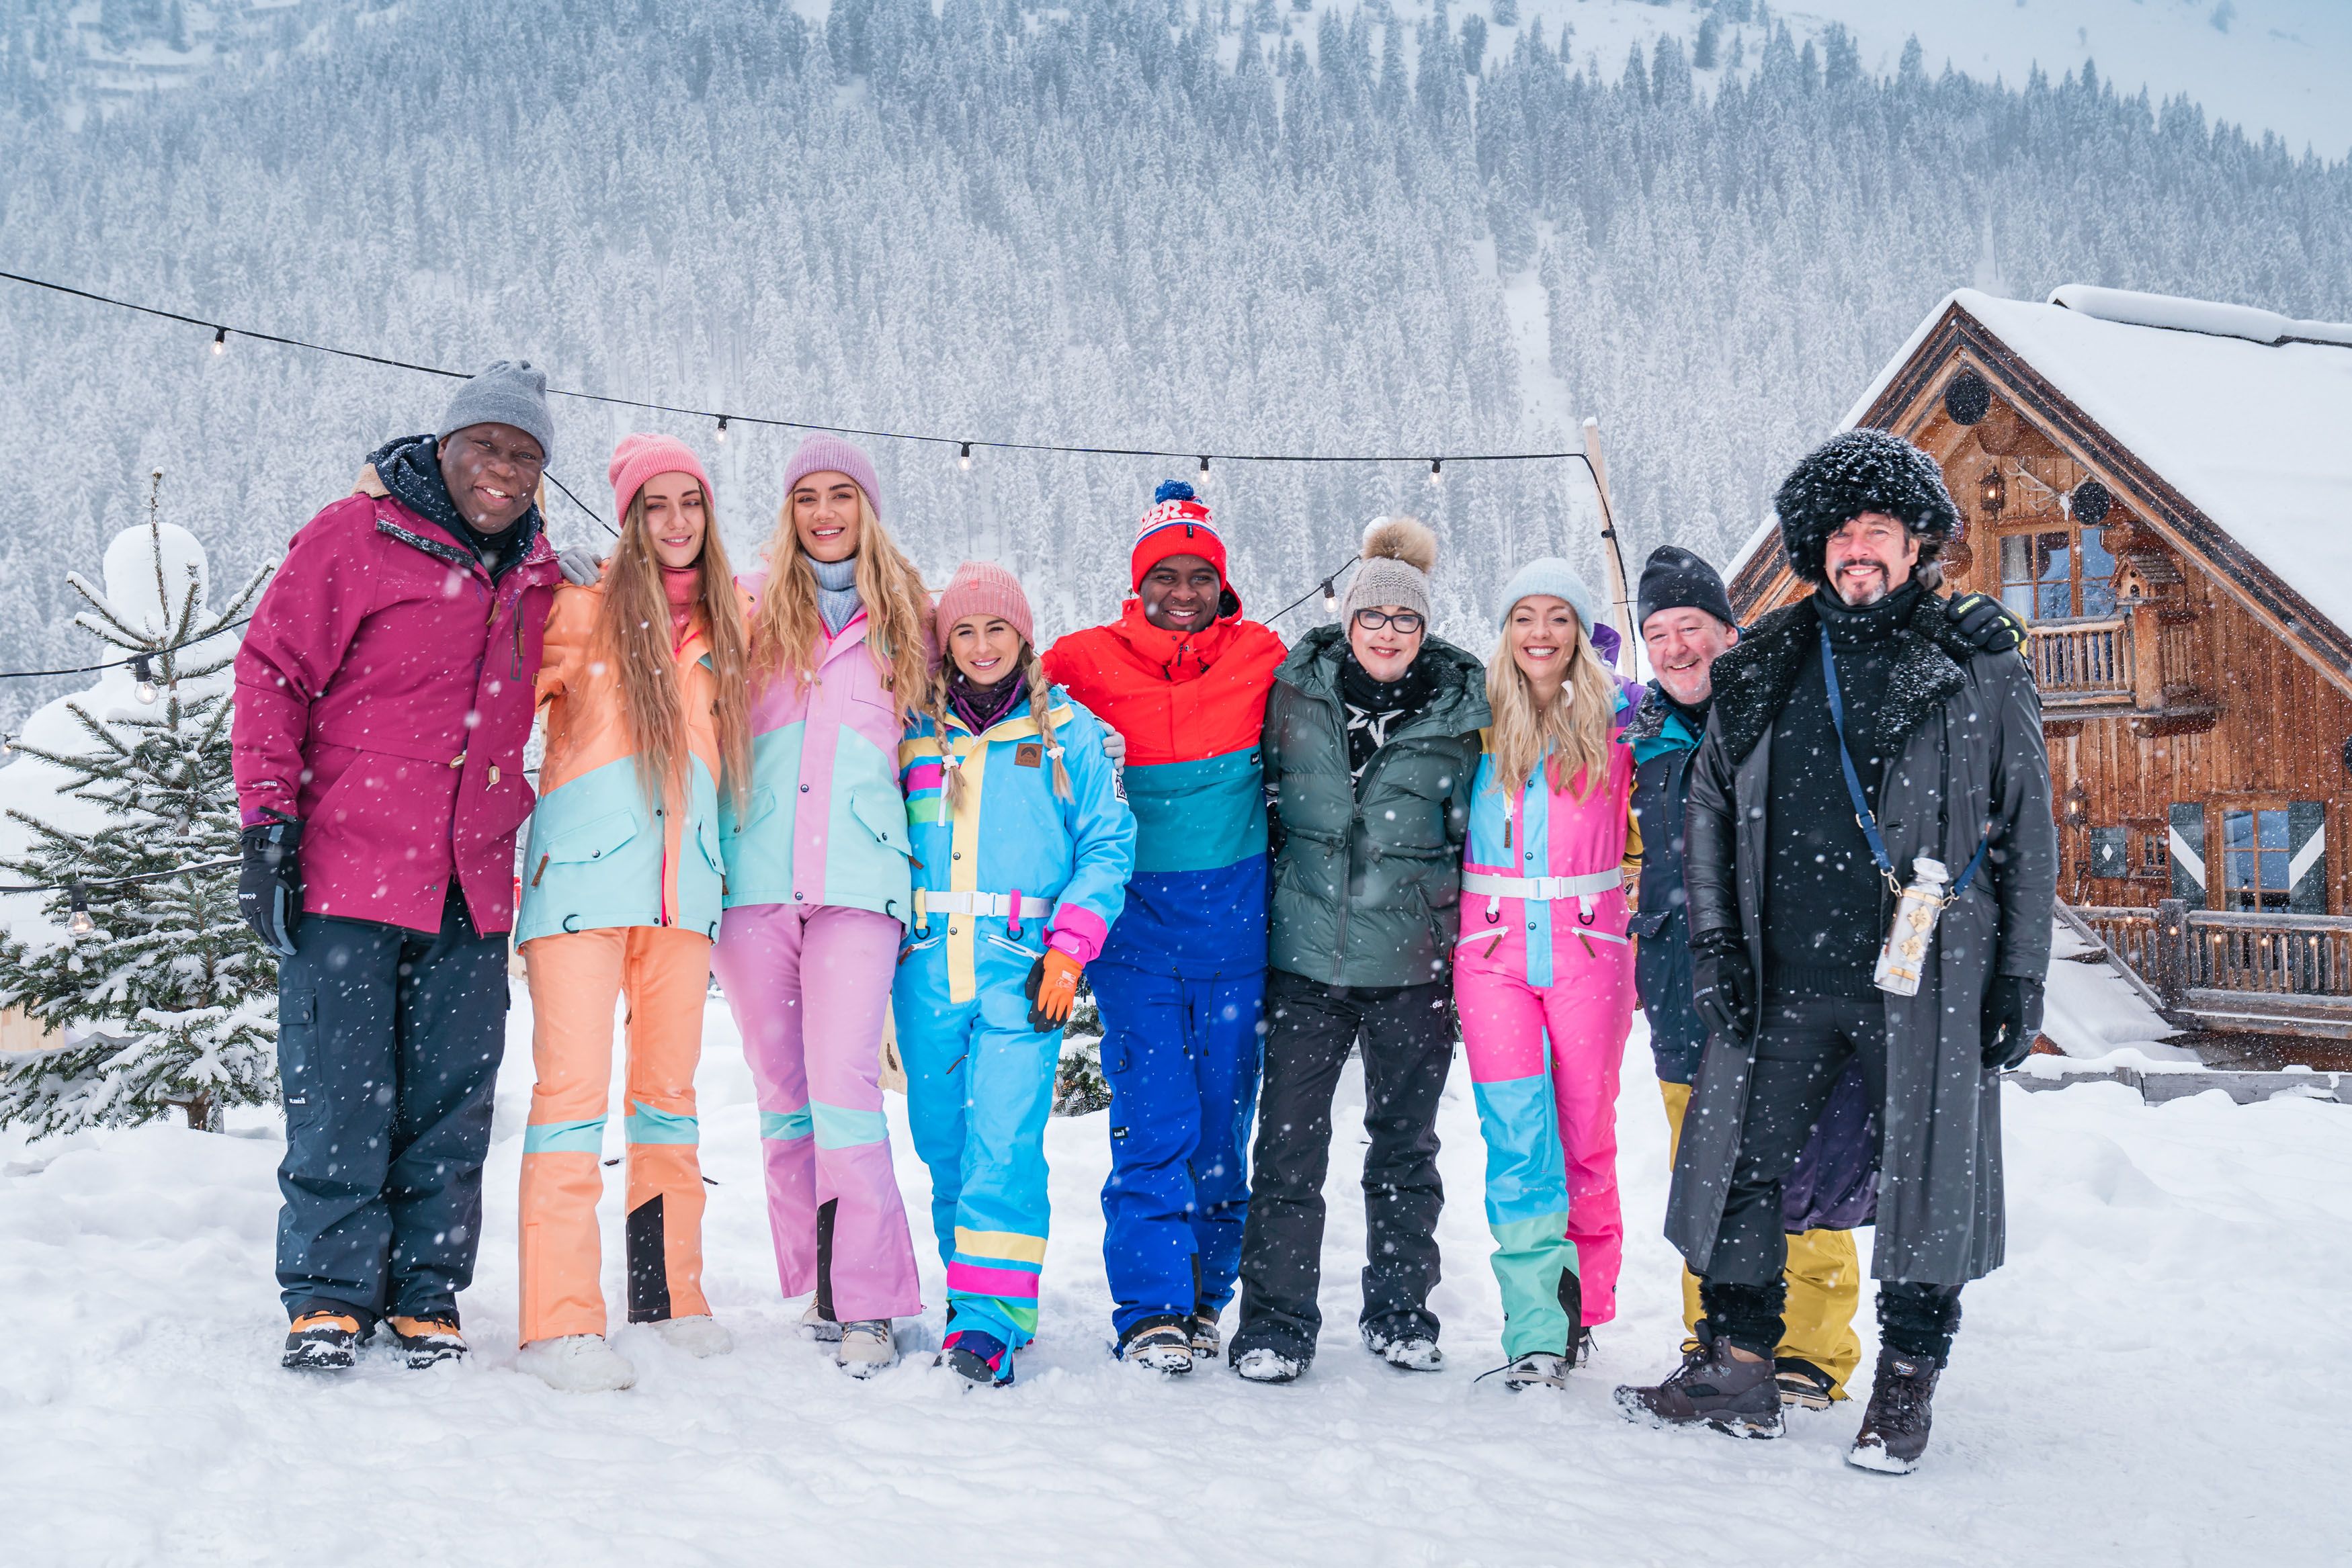 A group of 9 people dressed in warm snowsuits standing in a line in a snowy landscape.